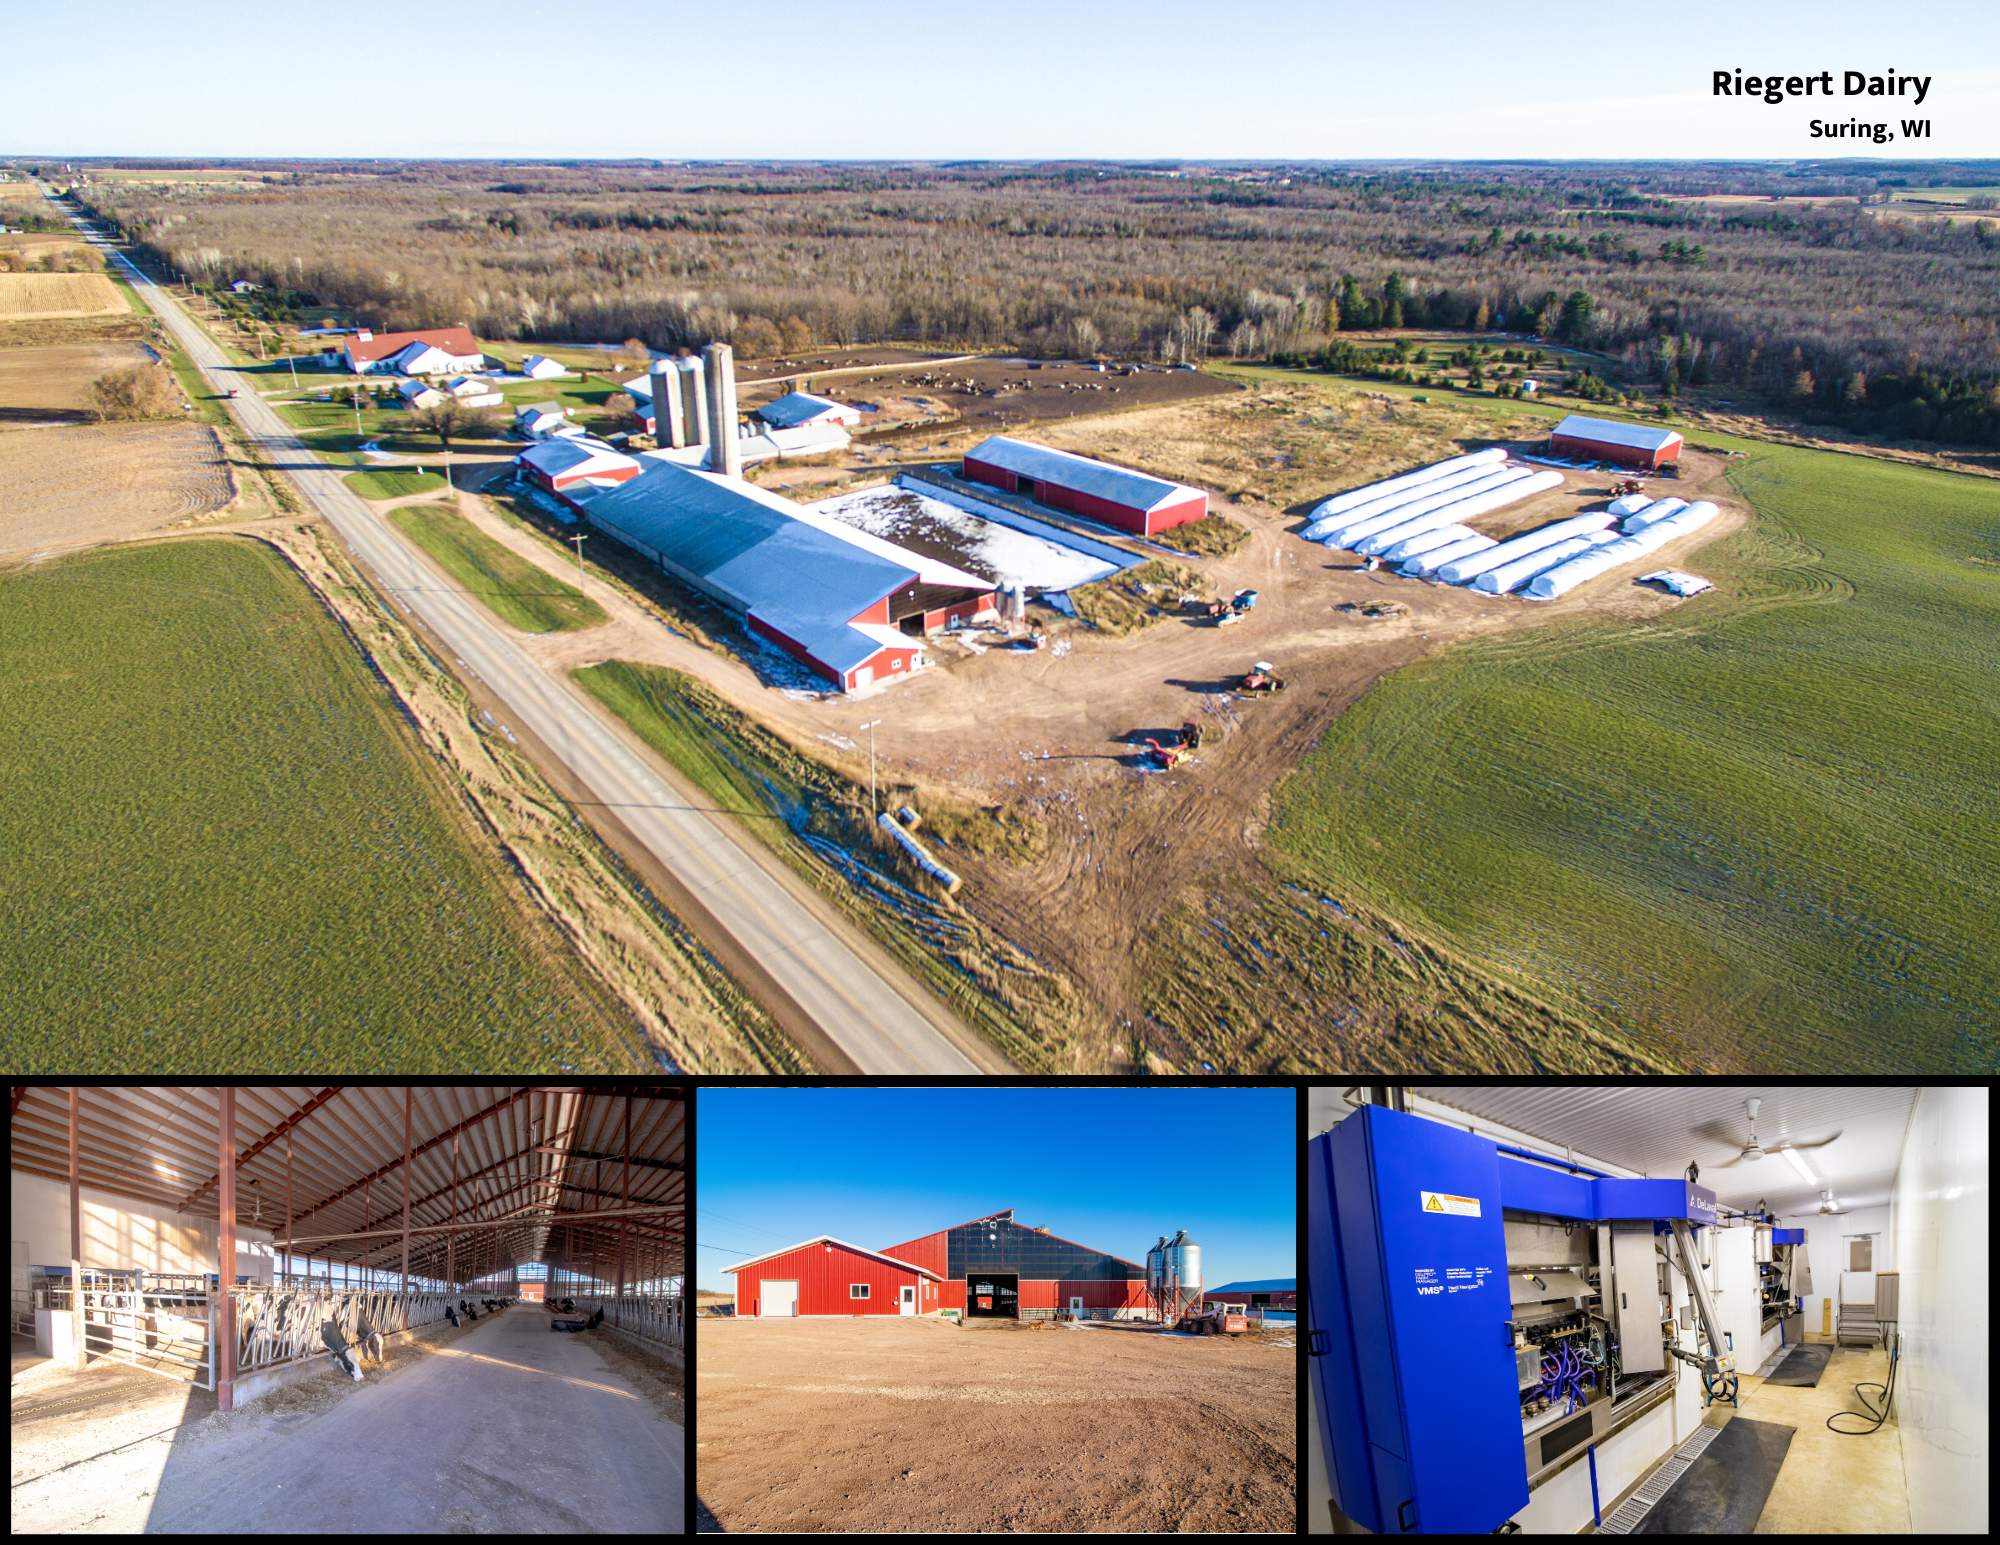 Agricultural Construction: Robot Dairy & Freestall Addition: Riegert Dairy, Suring, WI